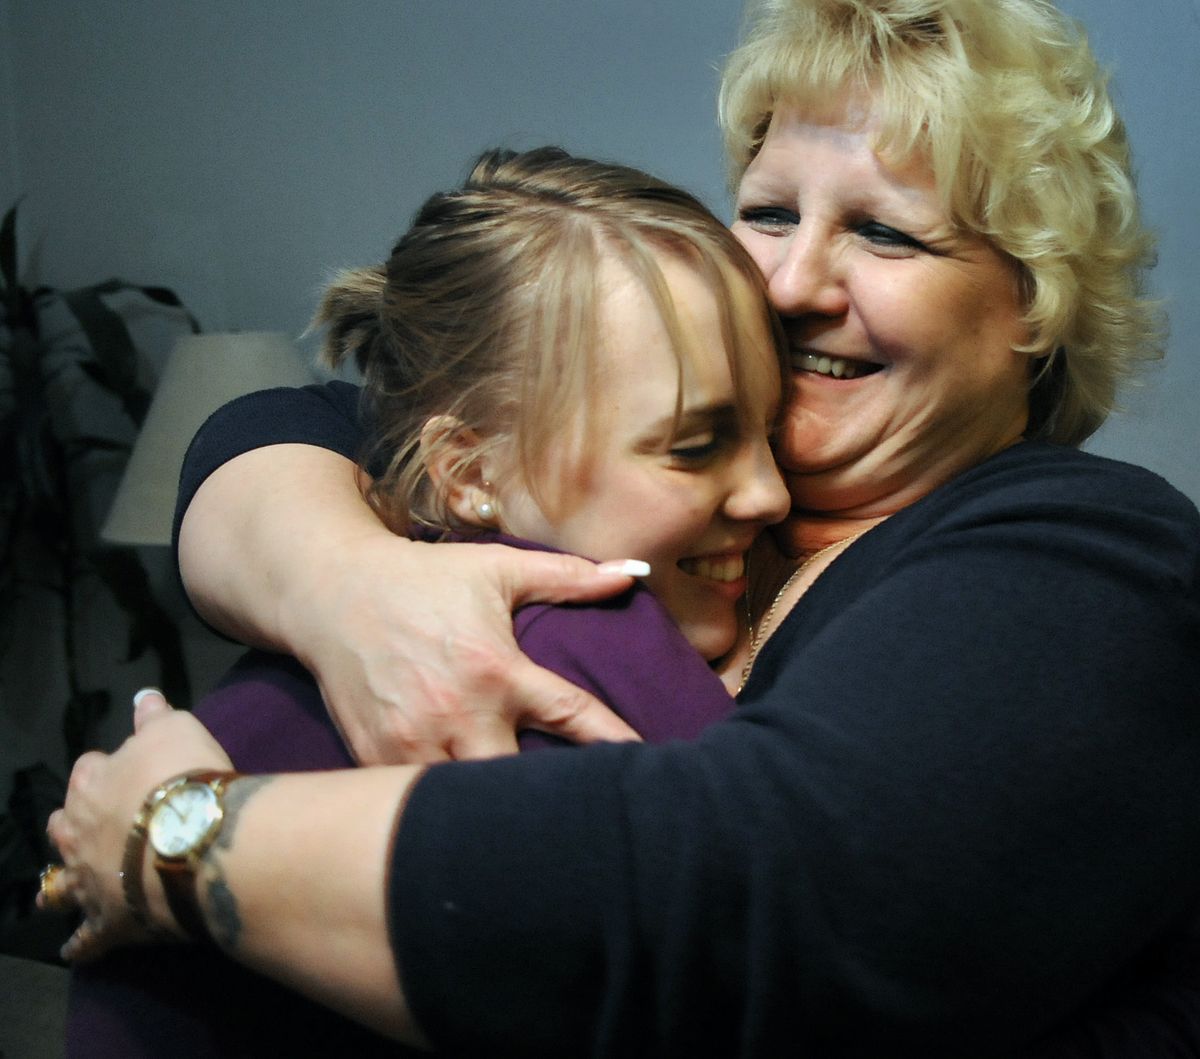 Carissa Outen embraces her mother, Gwen Ashcraft, at the family home in northwest Spokane. (Dan Pelle)